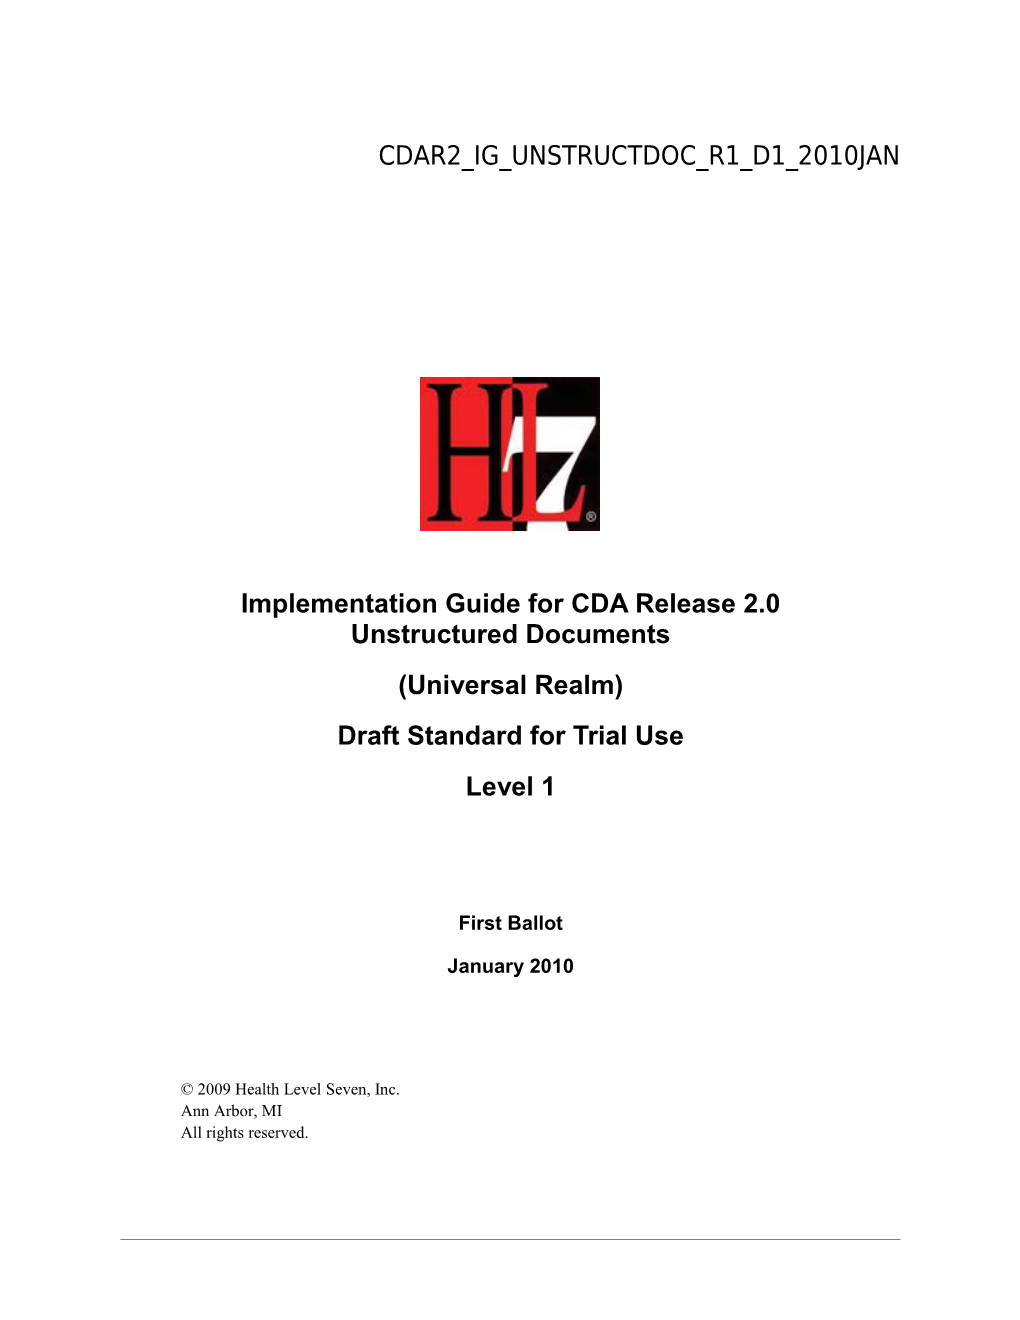 Implementation Guide for CDA Release 2.0 Unstructured Documents